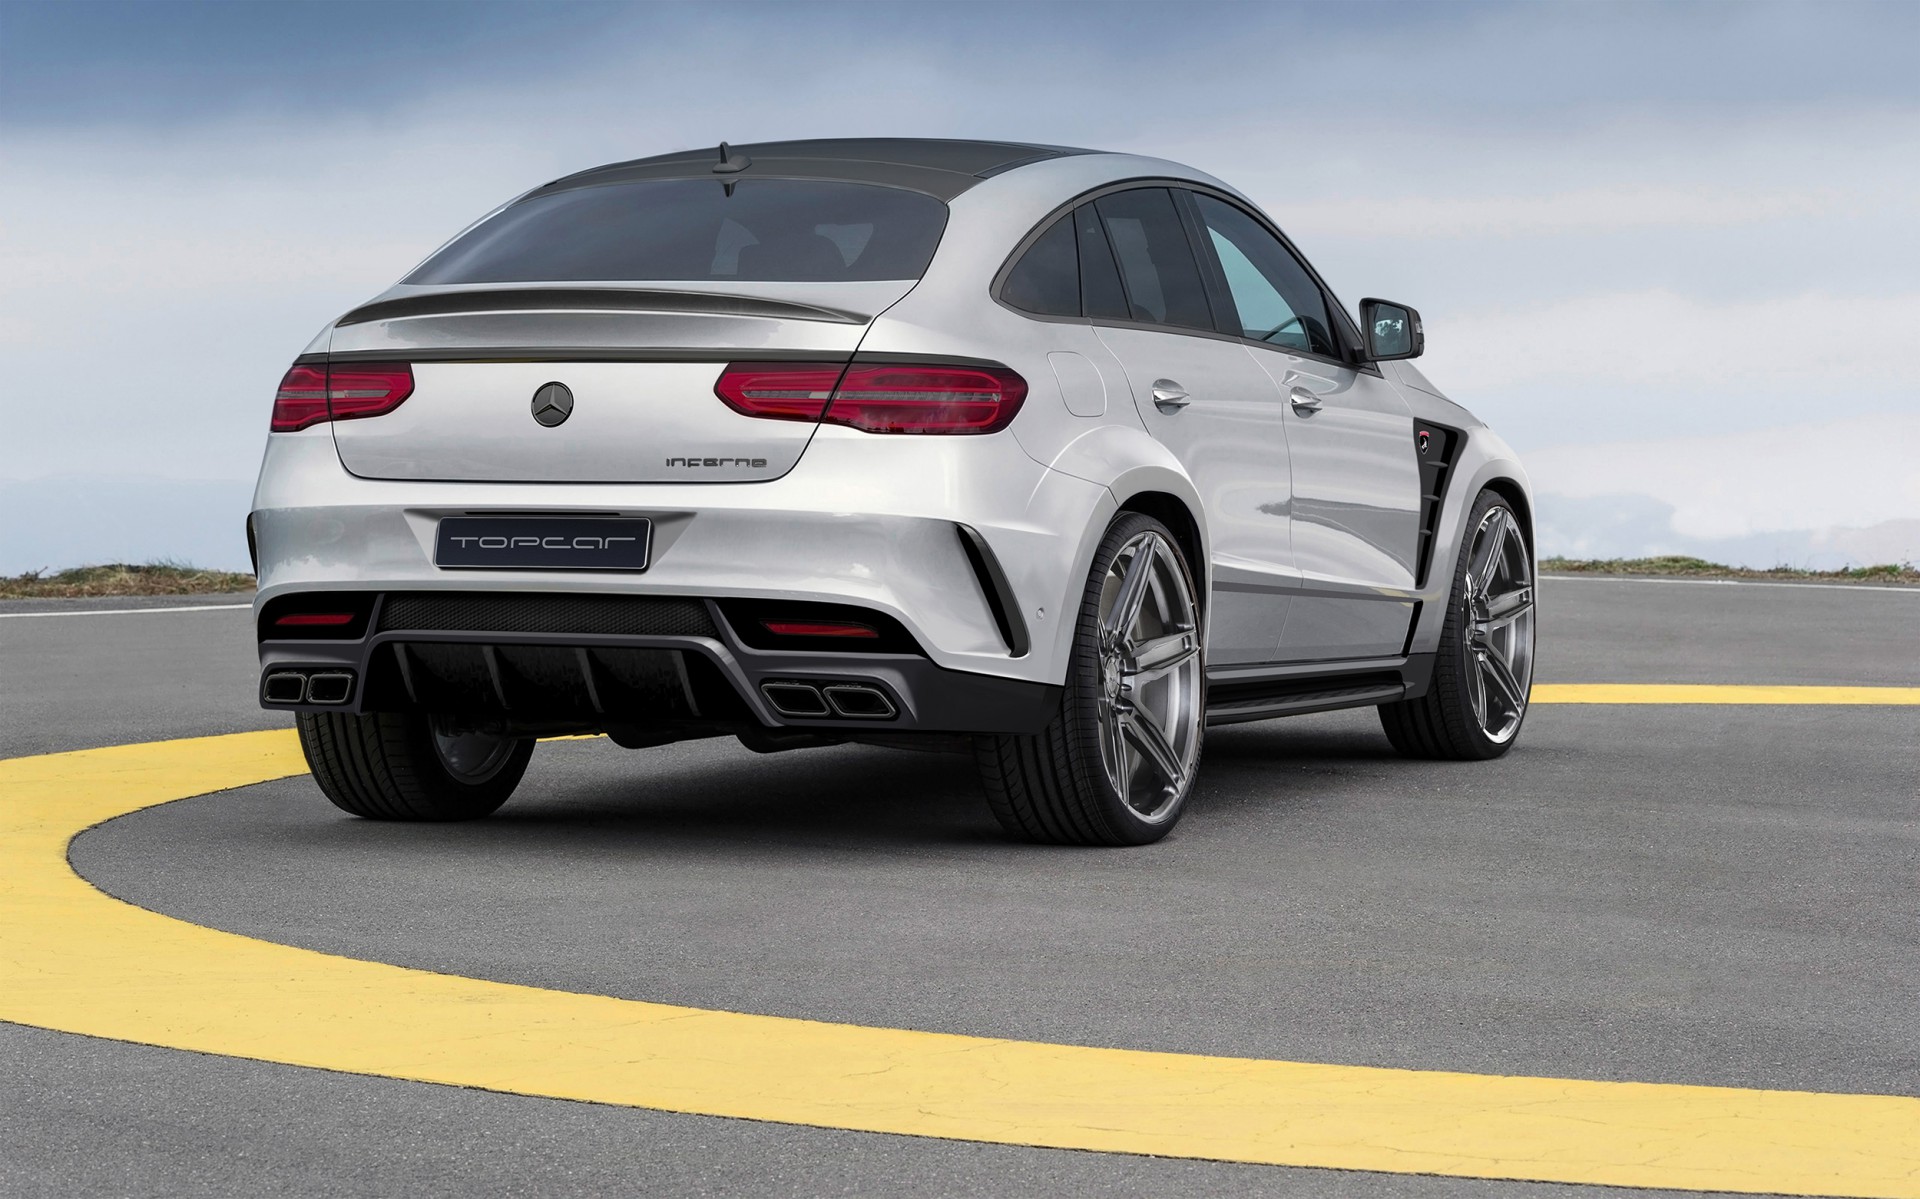 Tuning Mercedes Benz Gle Coupe 63 S Inferno Topcar